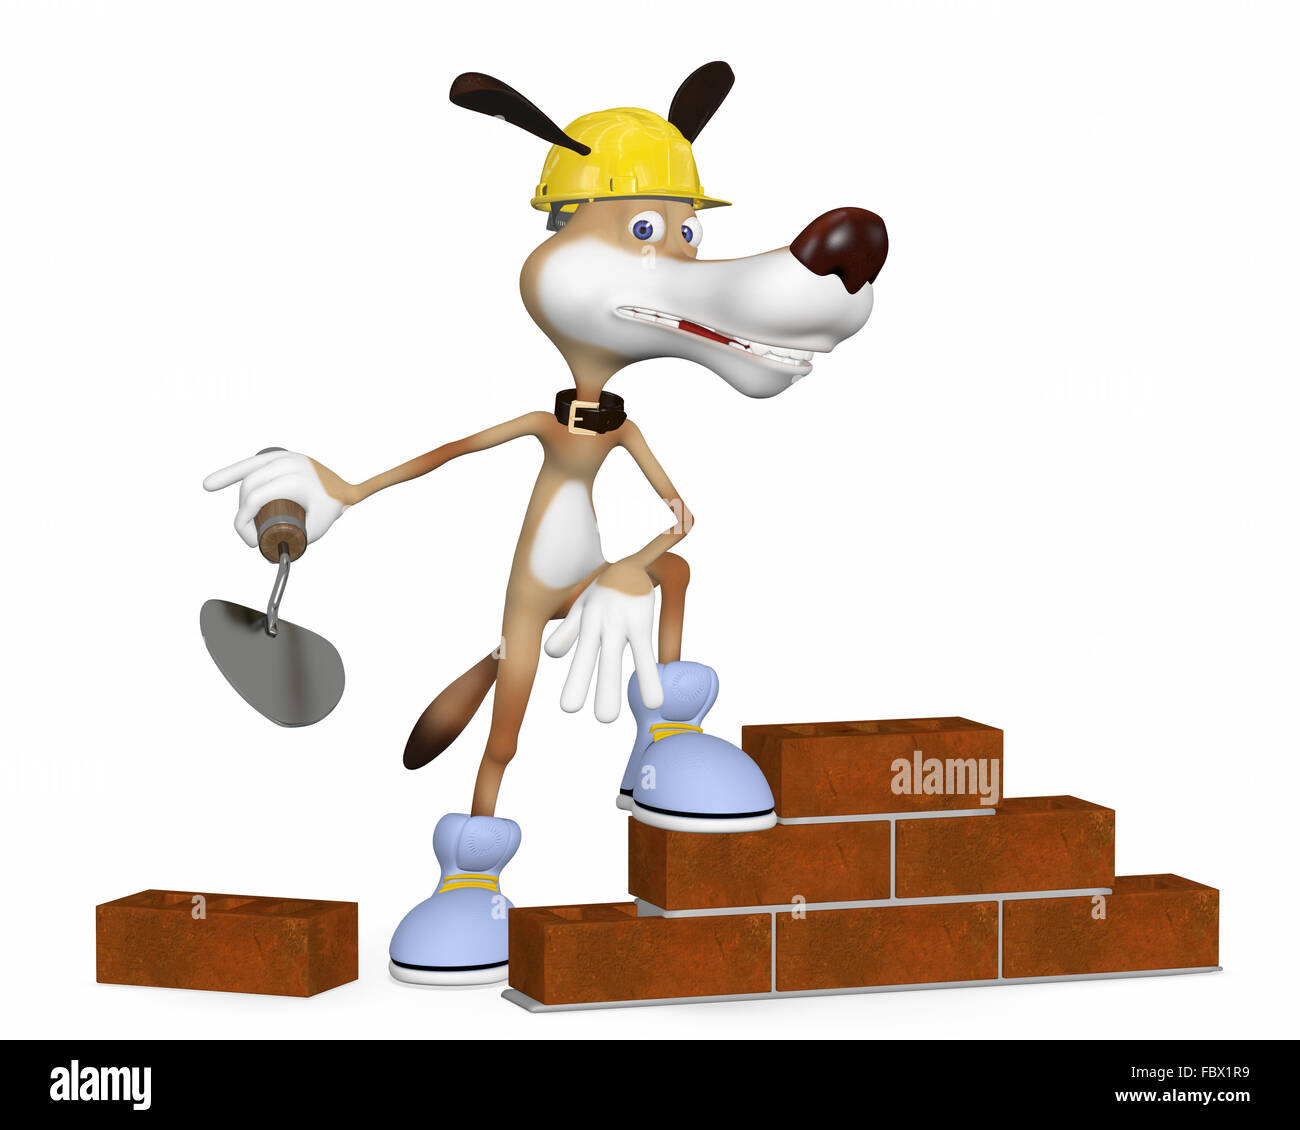 The dog on building lays a brick. Stock Photo